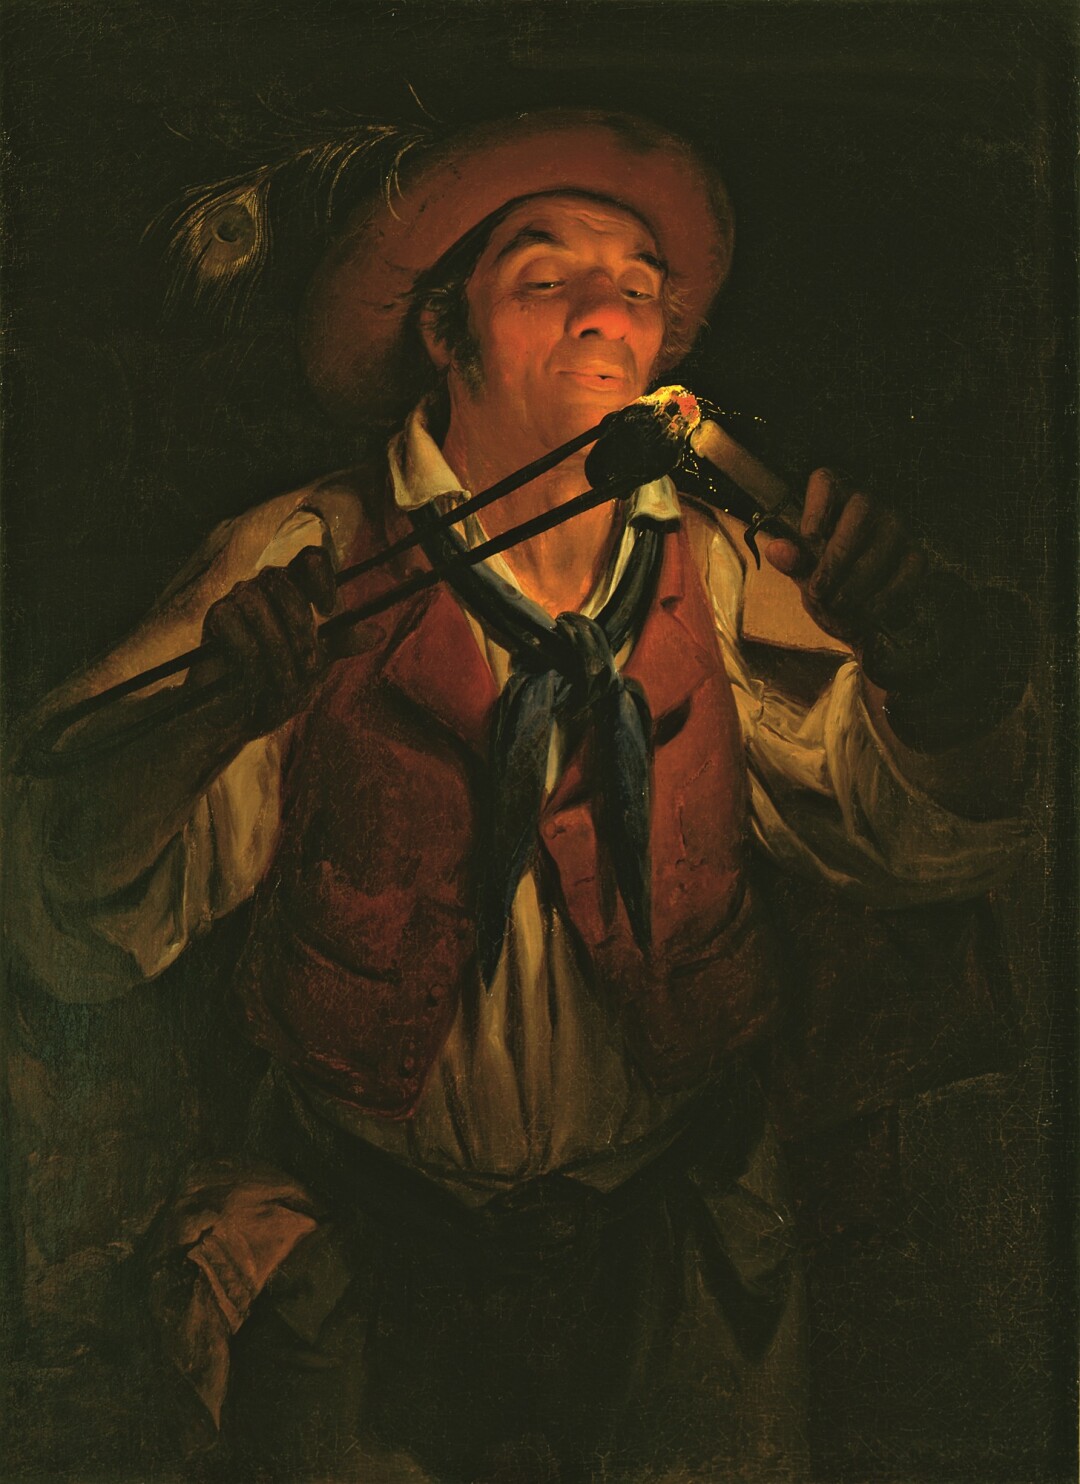 Peasant lighting a Candle with an Ember